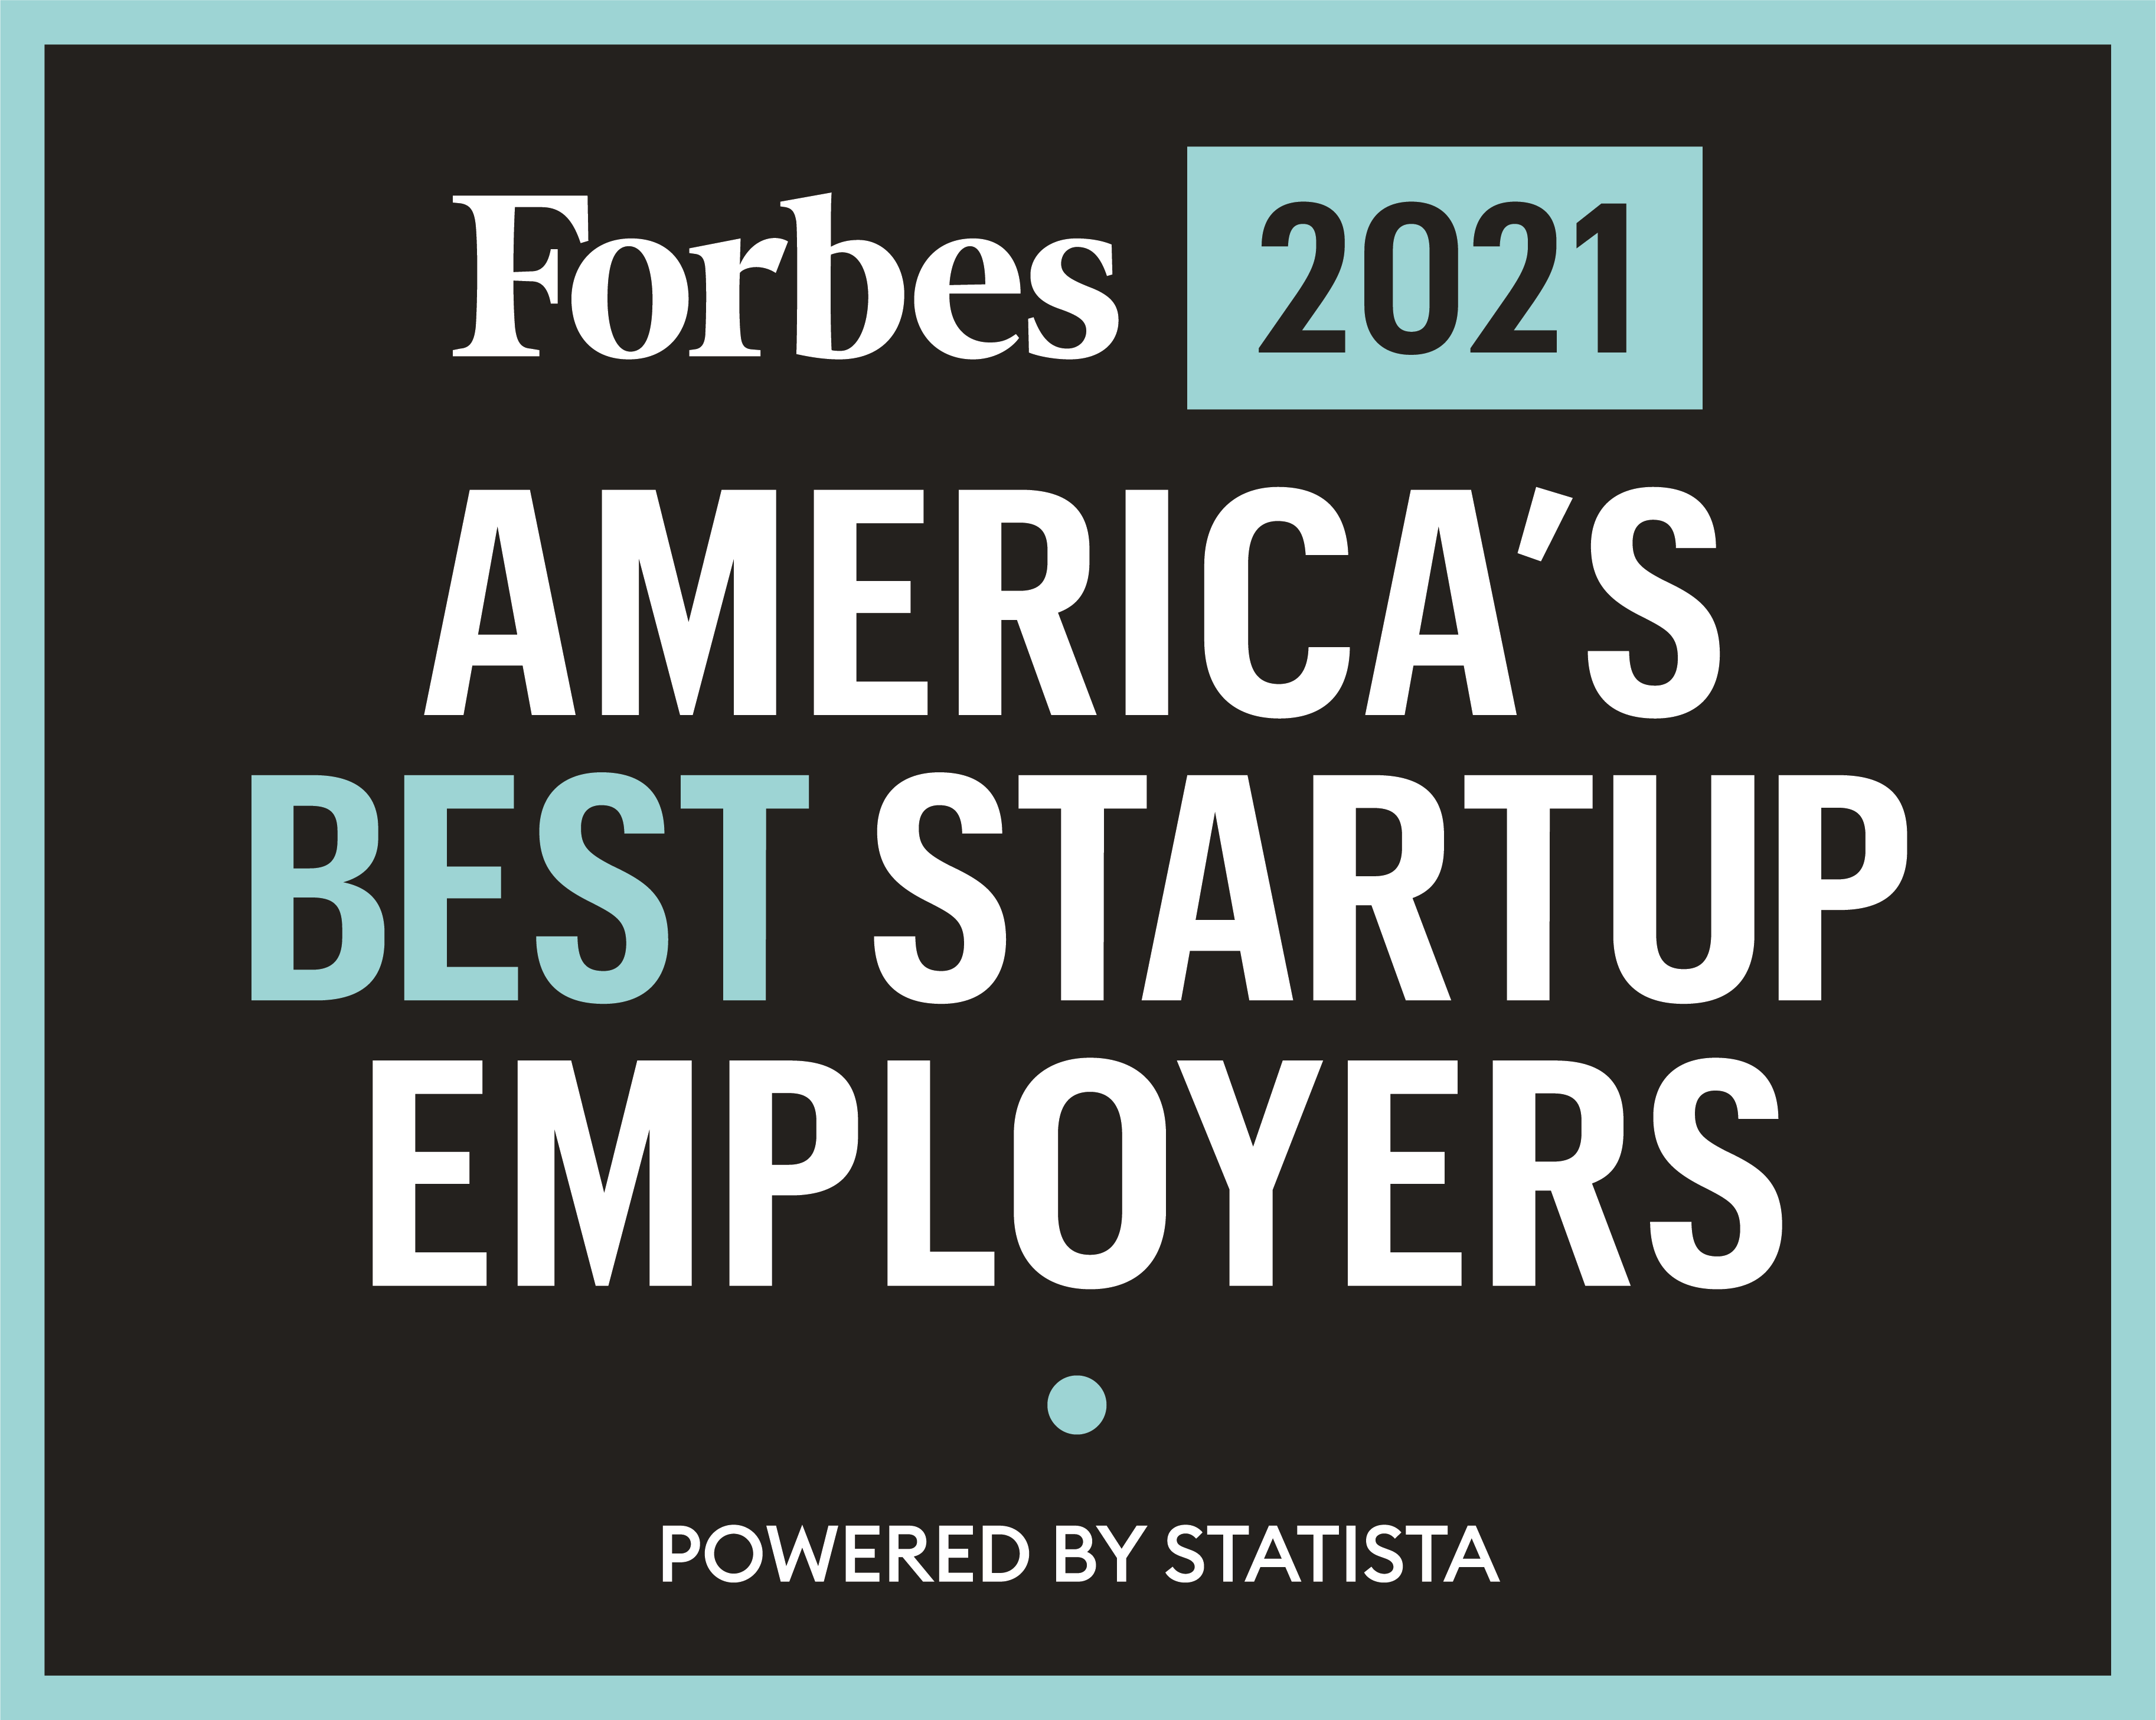 Forbes 2021 America's Best Startup Employers award